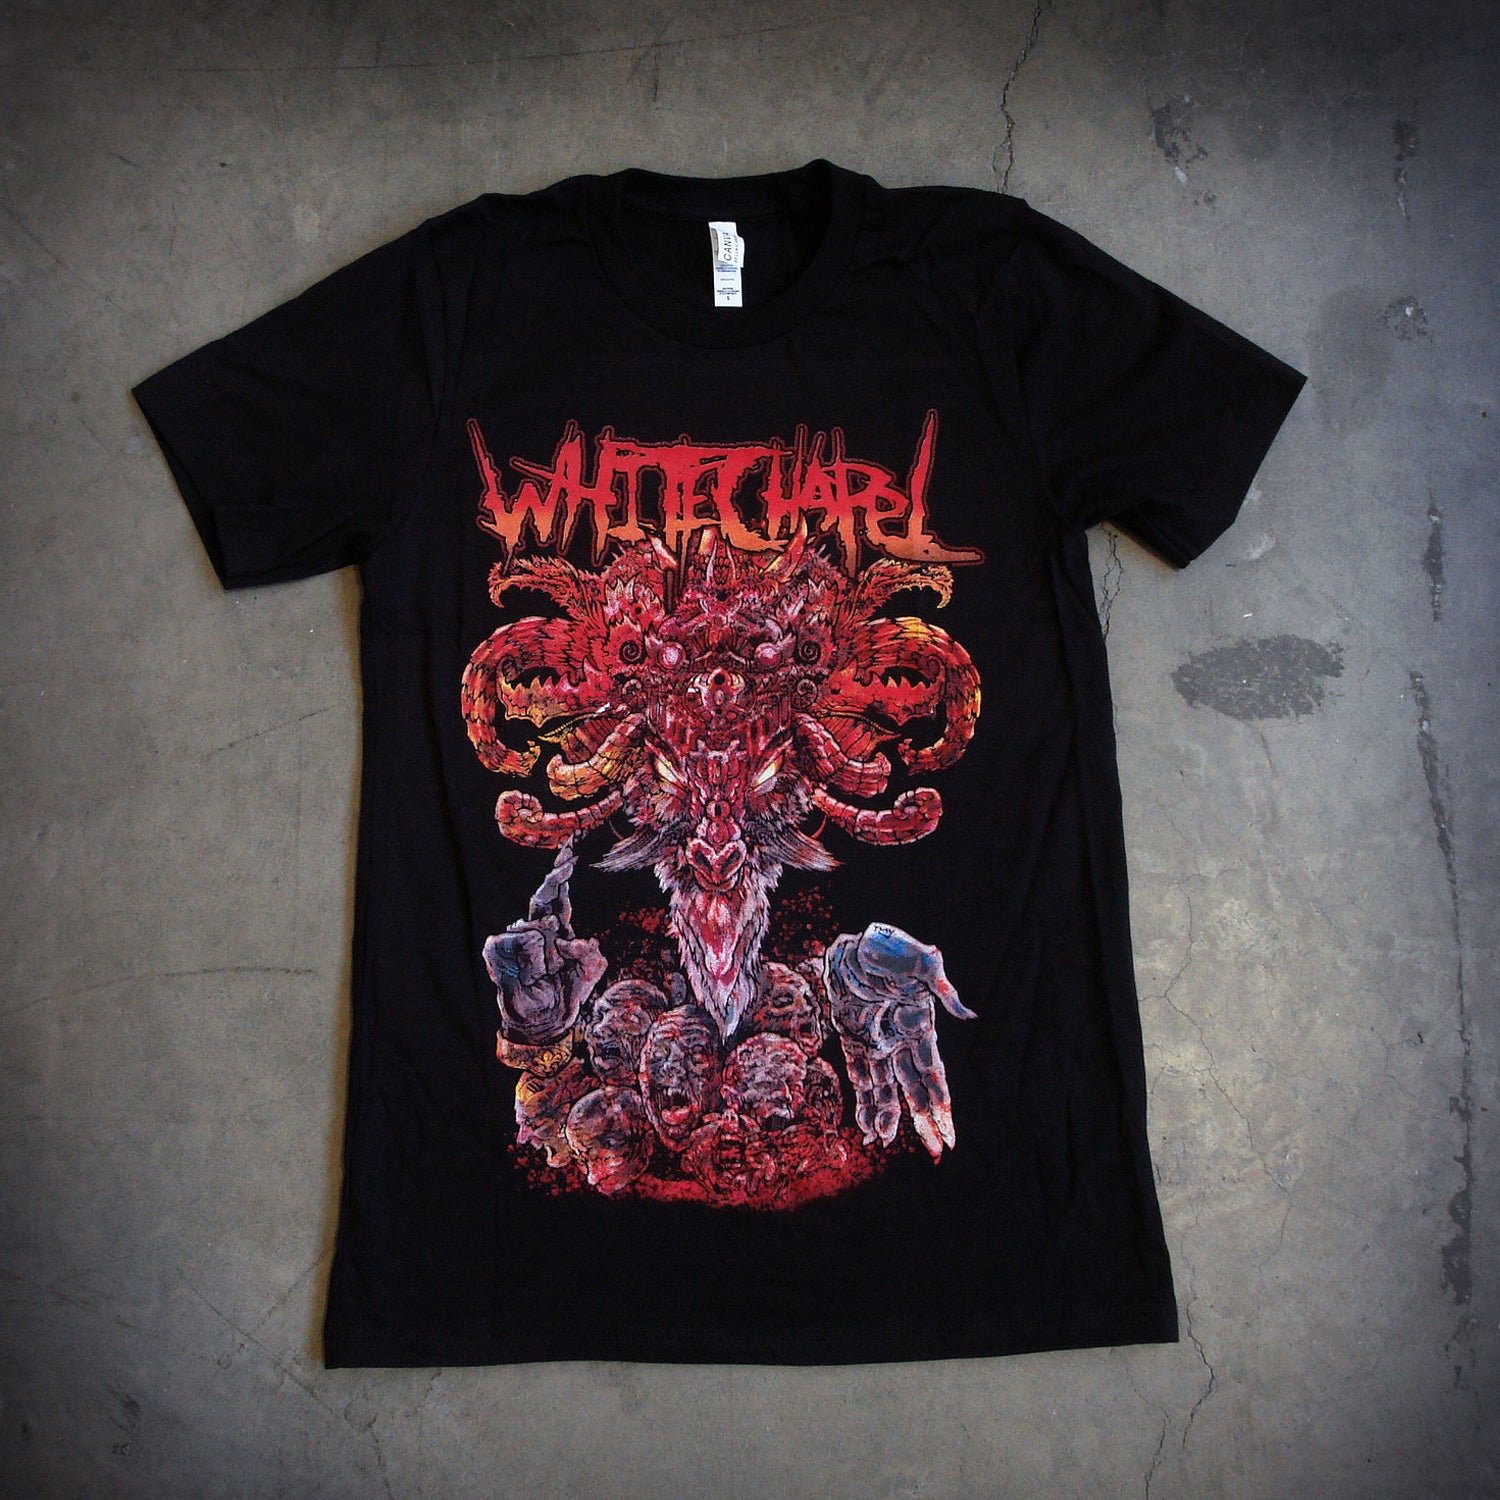 image of a black tee shirt. tee has full color body print of a demon medusa like head. at the top says whitechapel